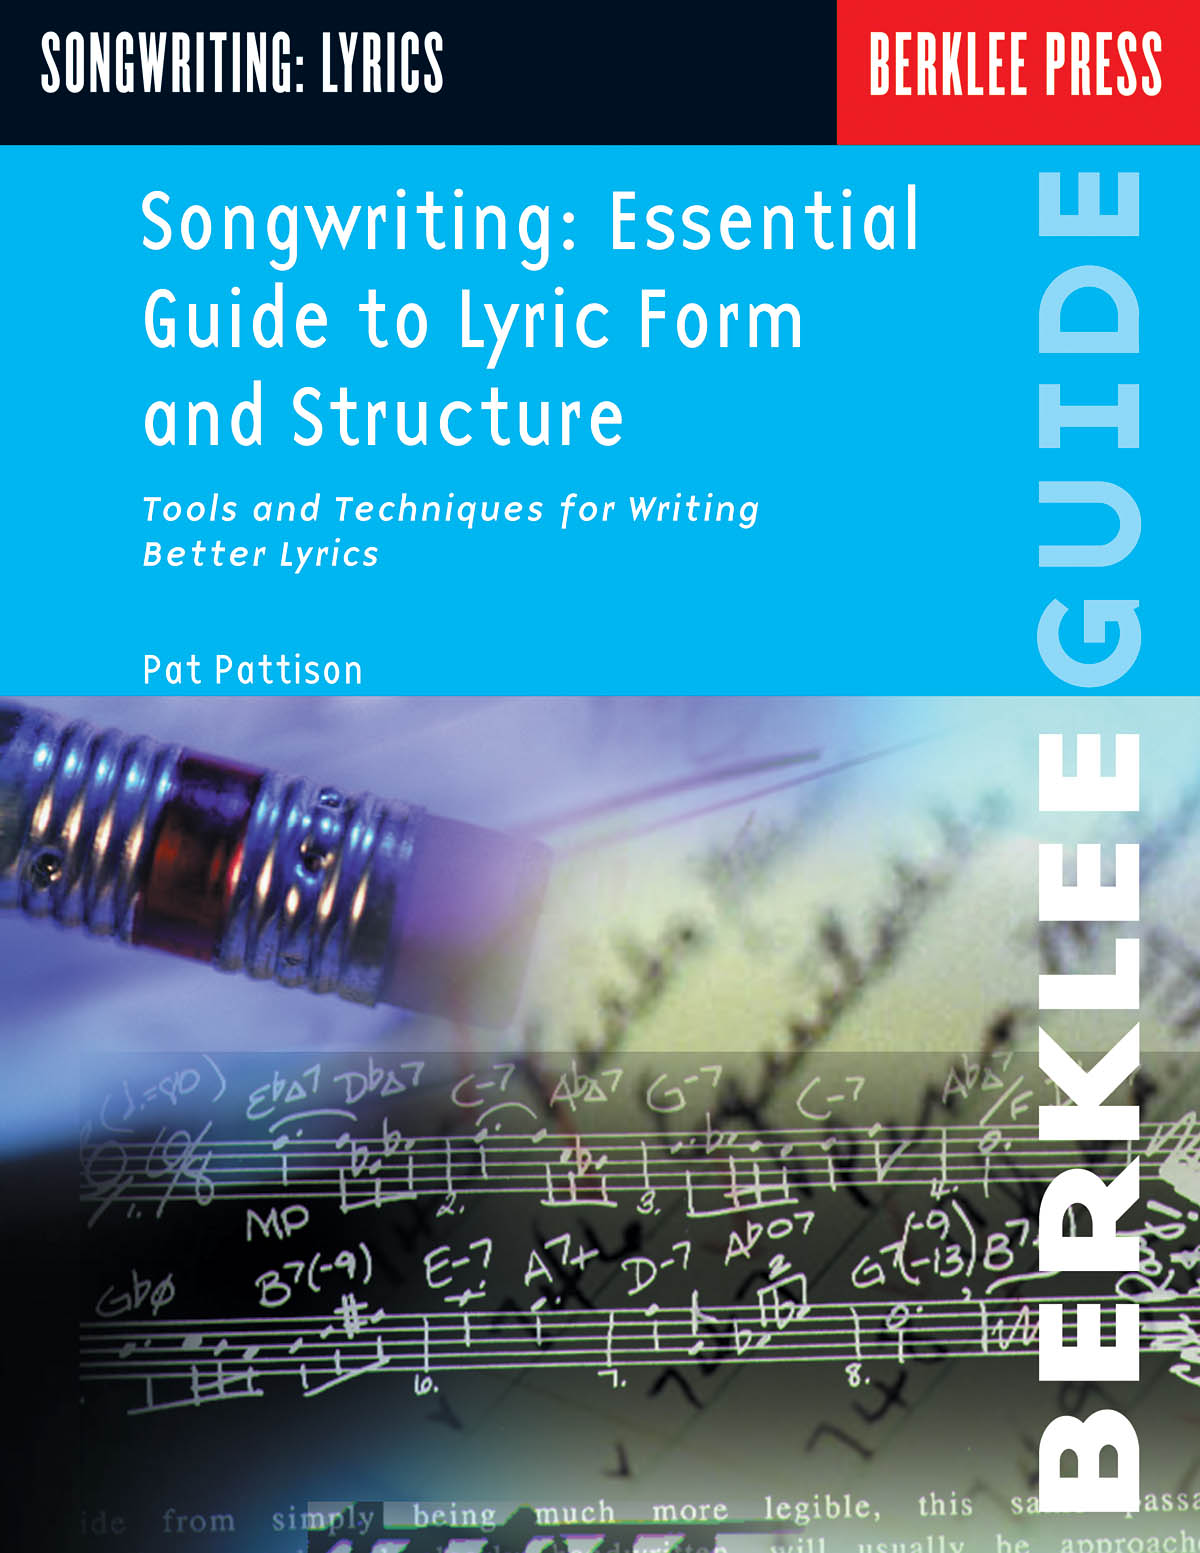 Songwriting: Ess. Guide to Lyric Form and Struct.: Instrumental Album